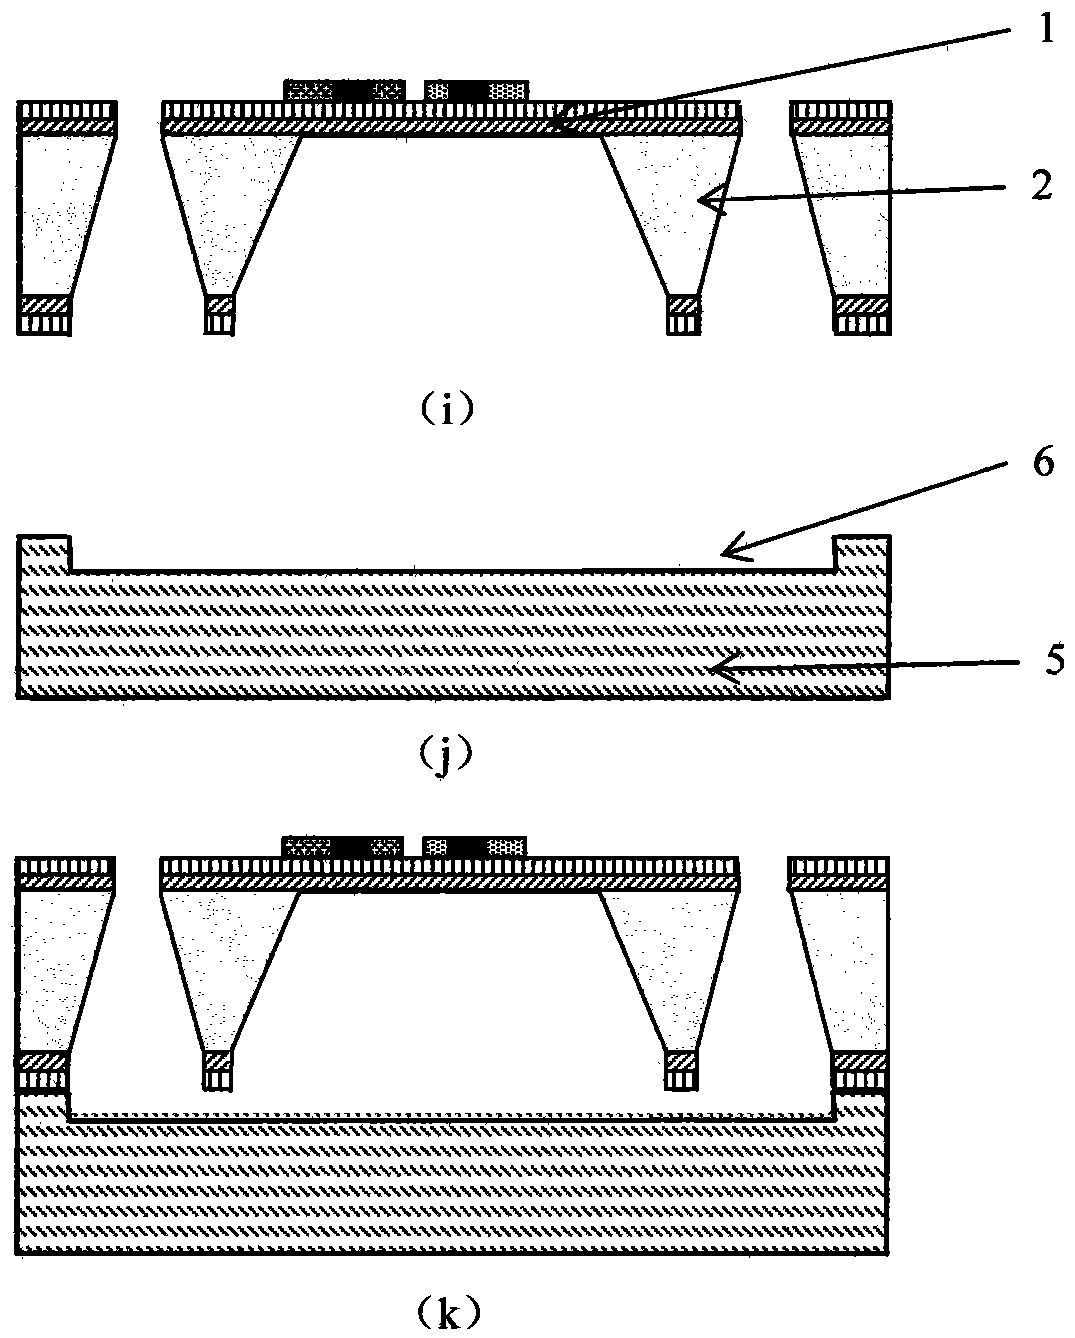 A resonant infrared detector structure and manufacturing method capable of isolating packaging stress